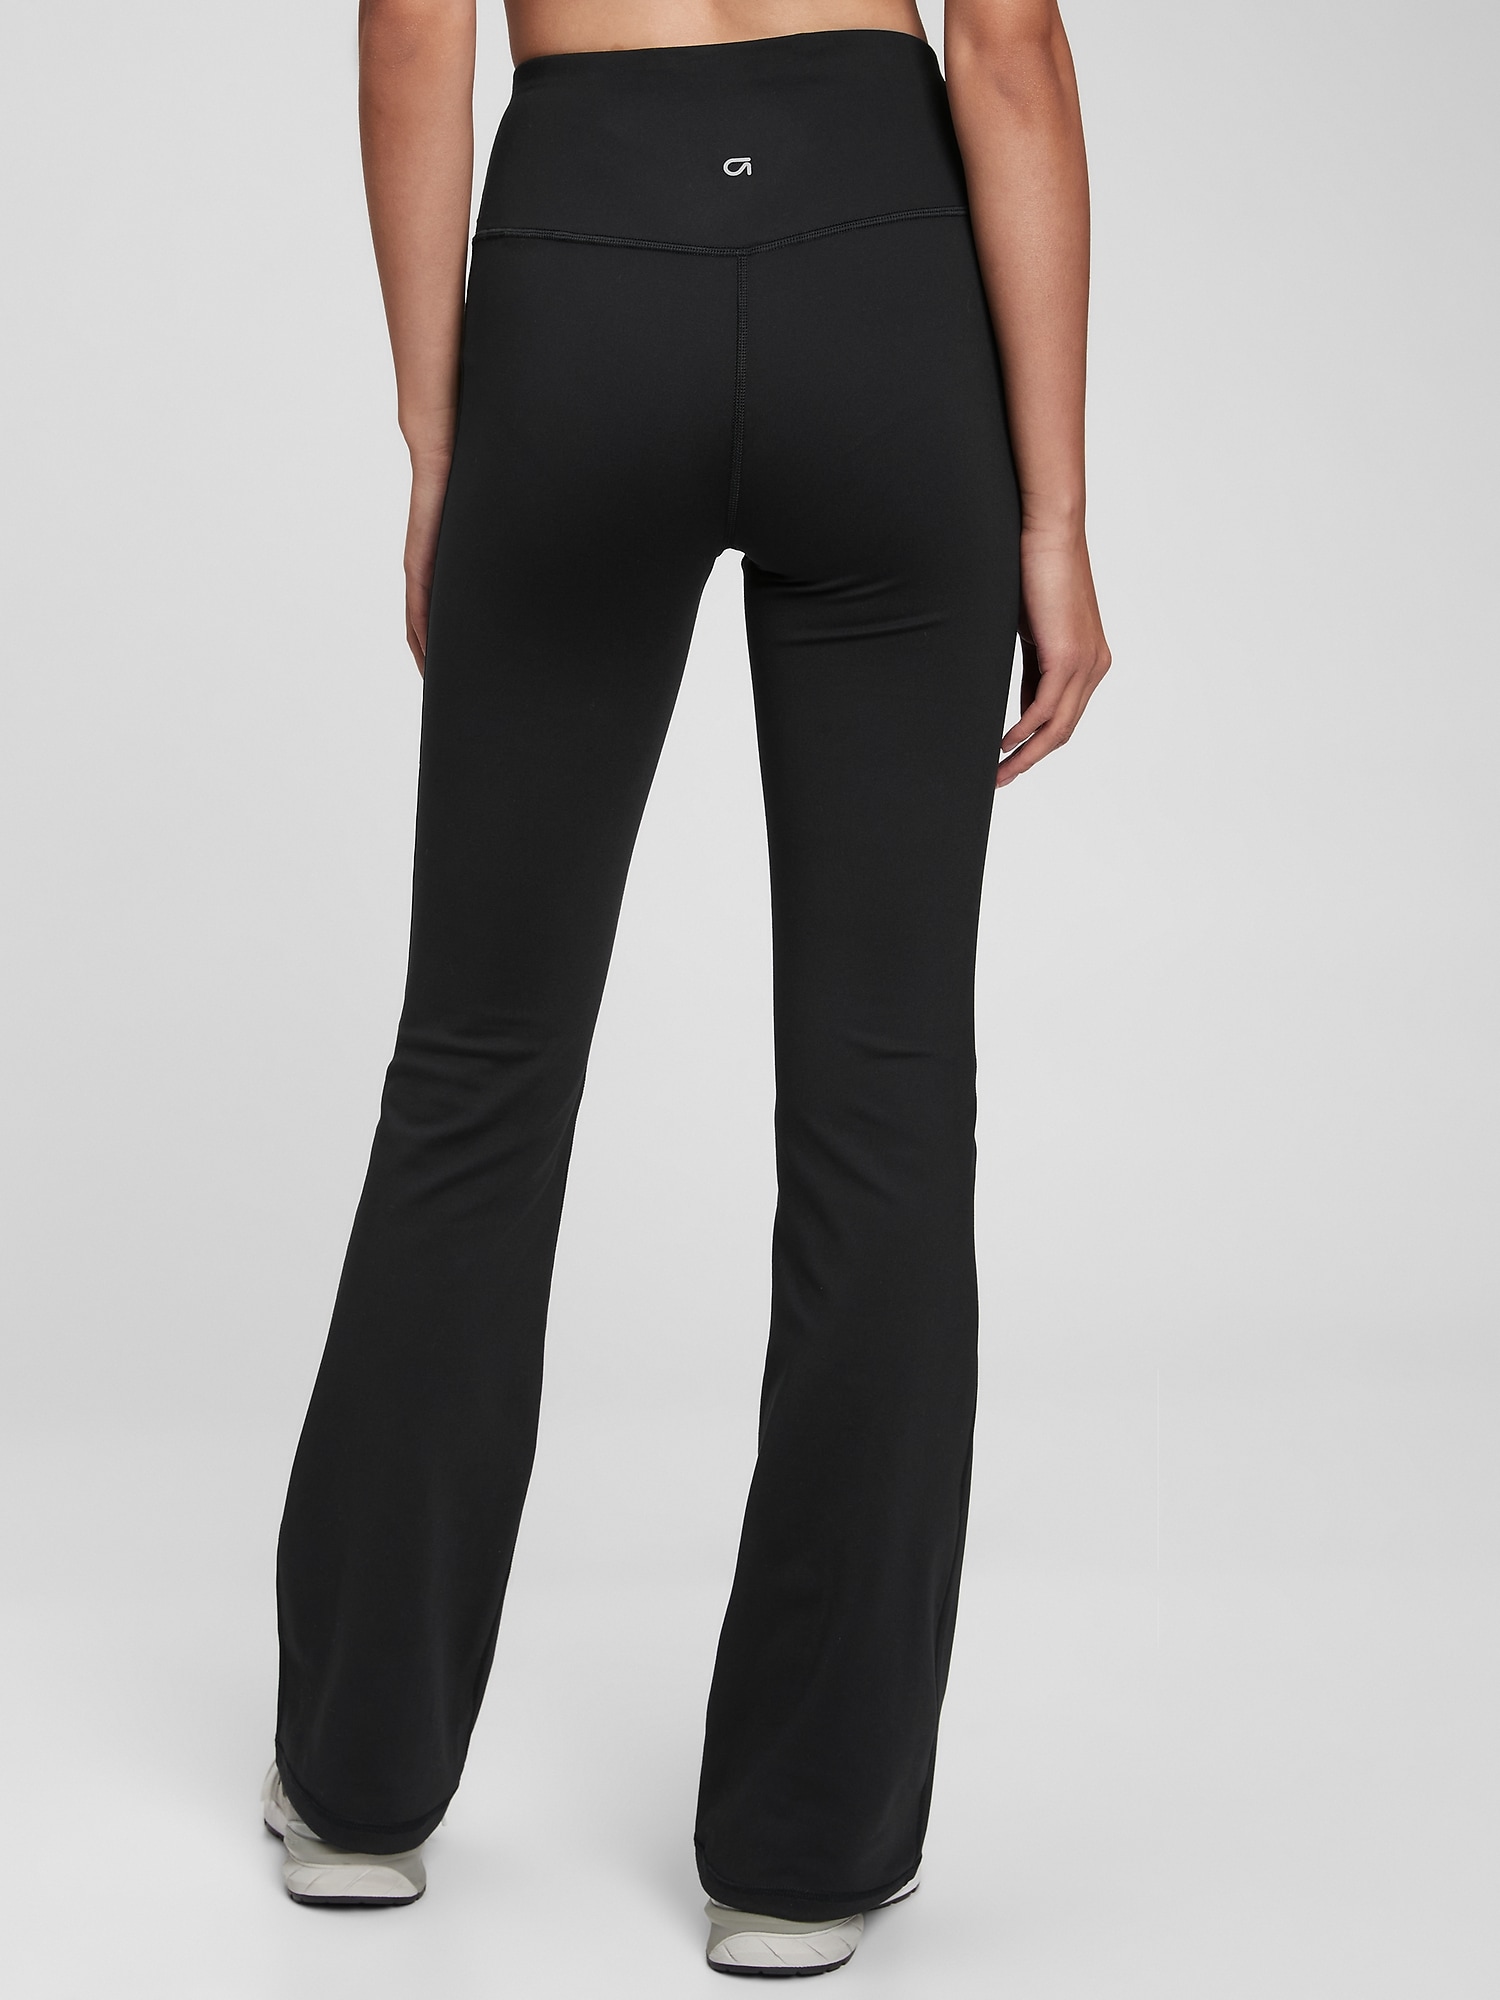  My Orders Placed Flare Leggings for Women Petite Tall